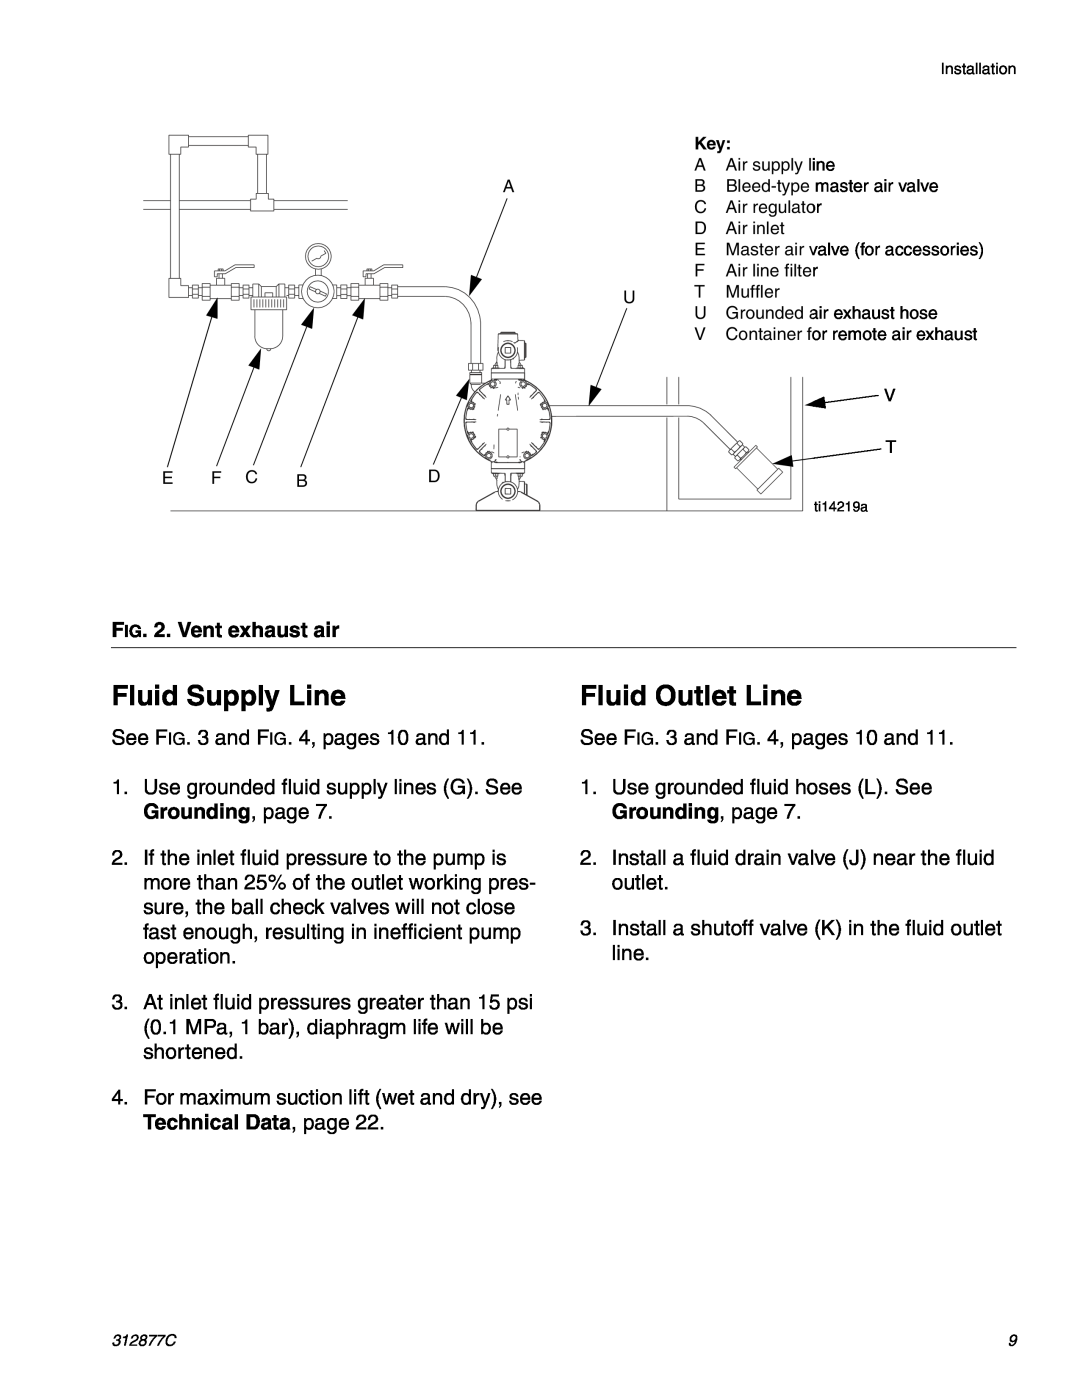 Graco 312877C important safety instructions Fluid Supply Line, Fluid Outlet Line, Vent exhaust air 